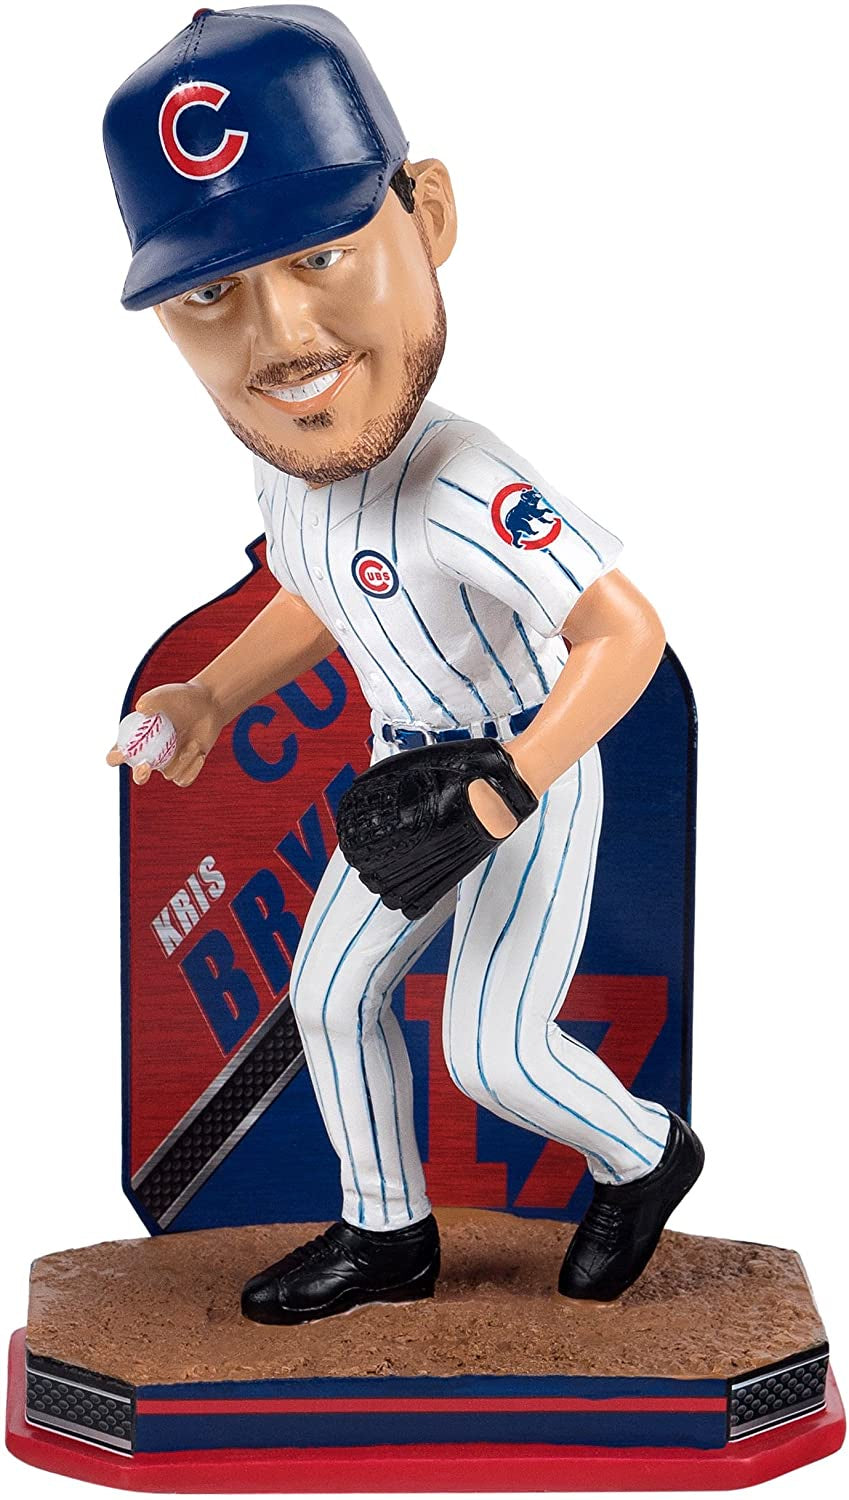 Kris Bryant  Chicago Cubs Limited Edition Bobblehead